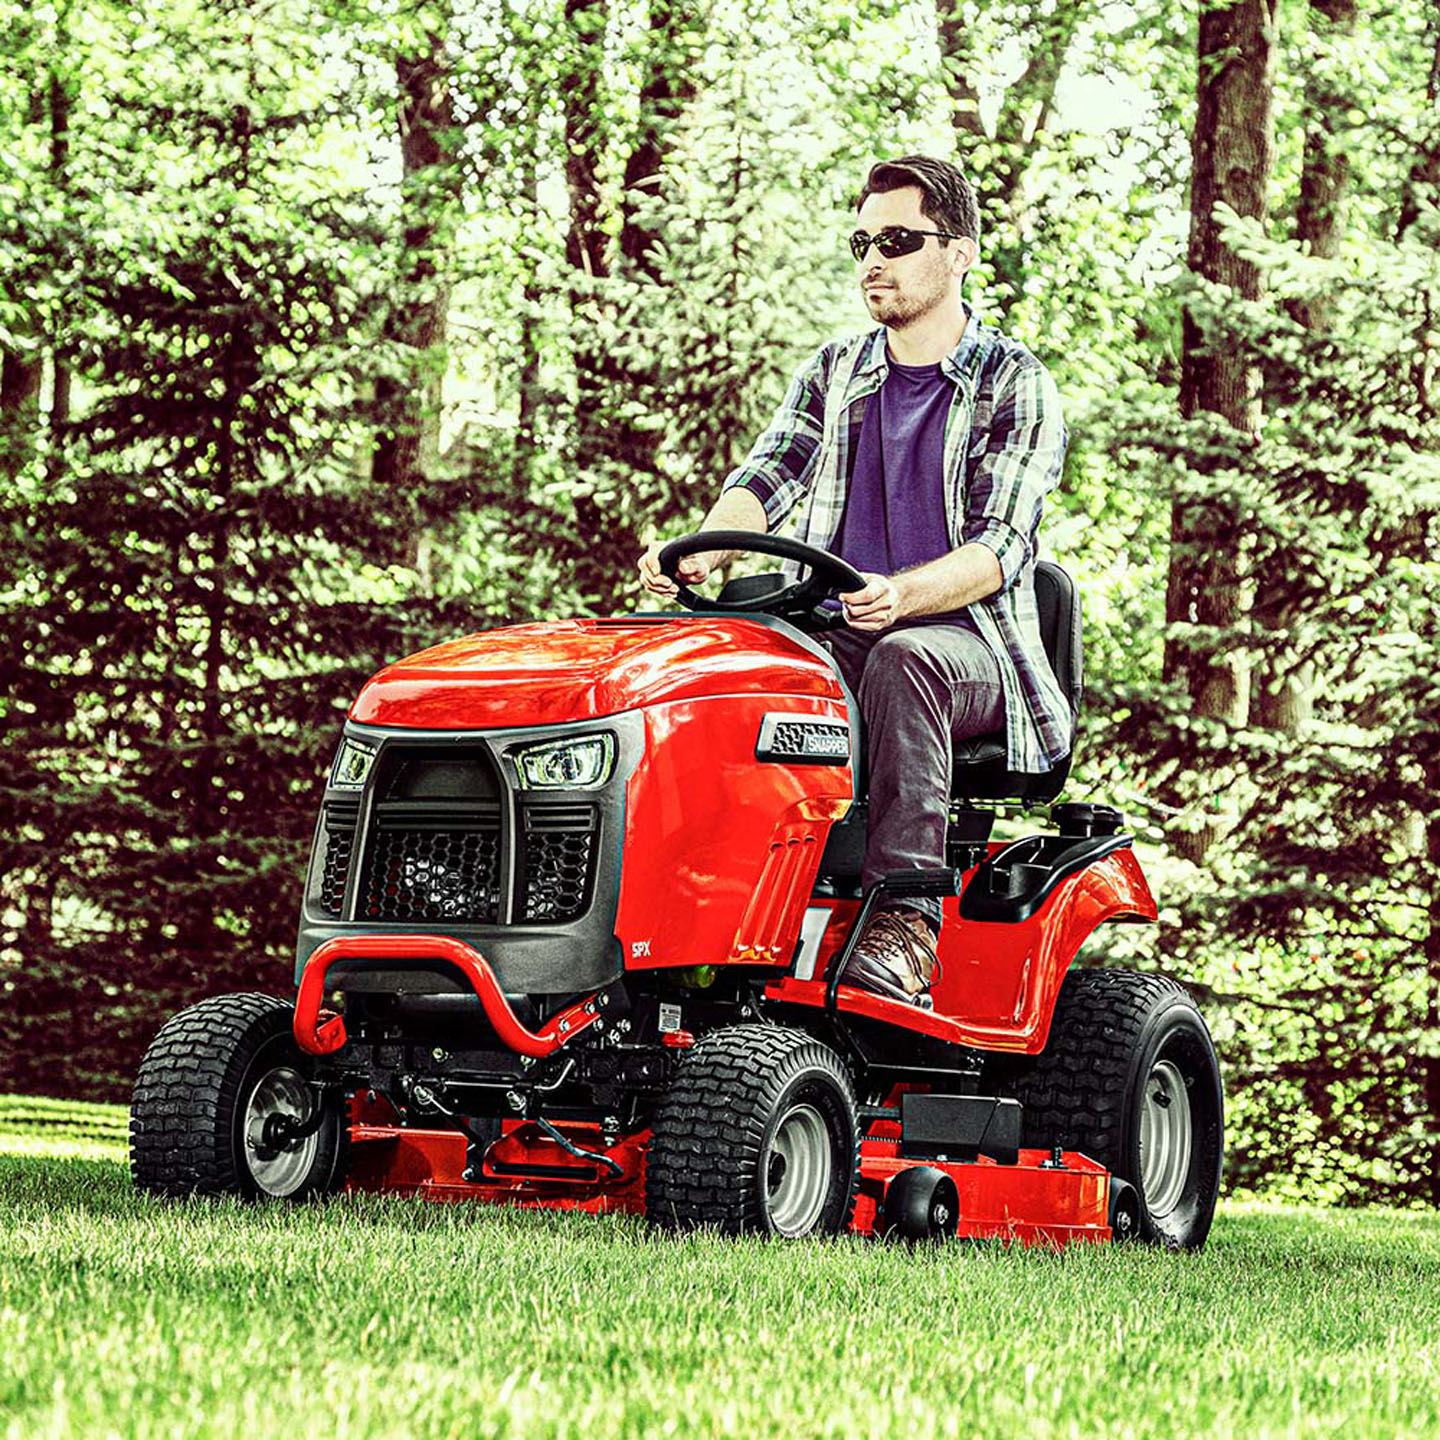 2022 Snapper SPX 48 in. Briggs & Stratton PXi Series 25 hp in Rice Lake, Wisconsin - Photo 5